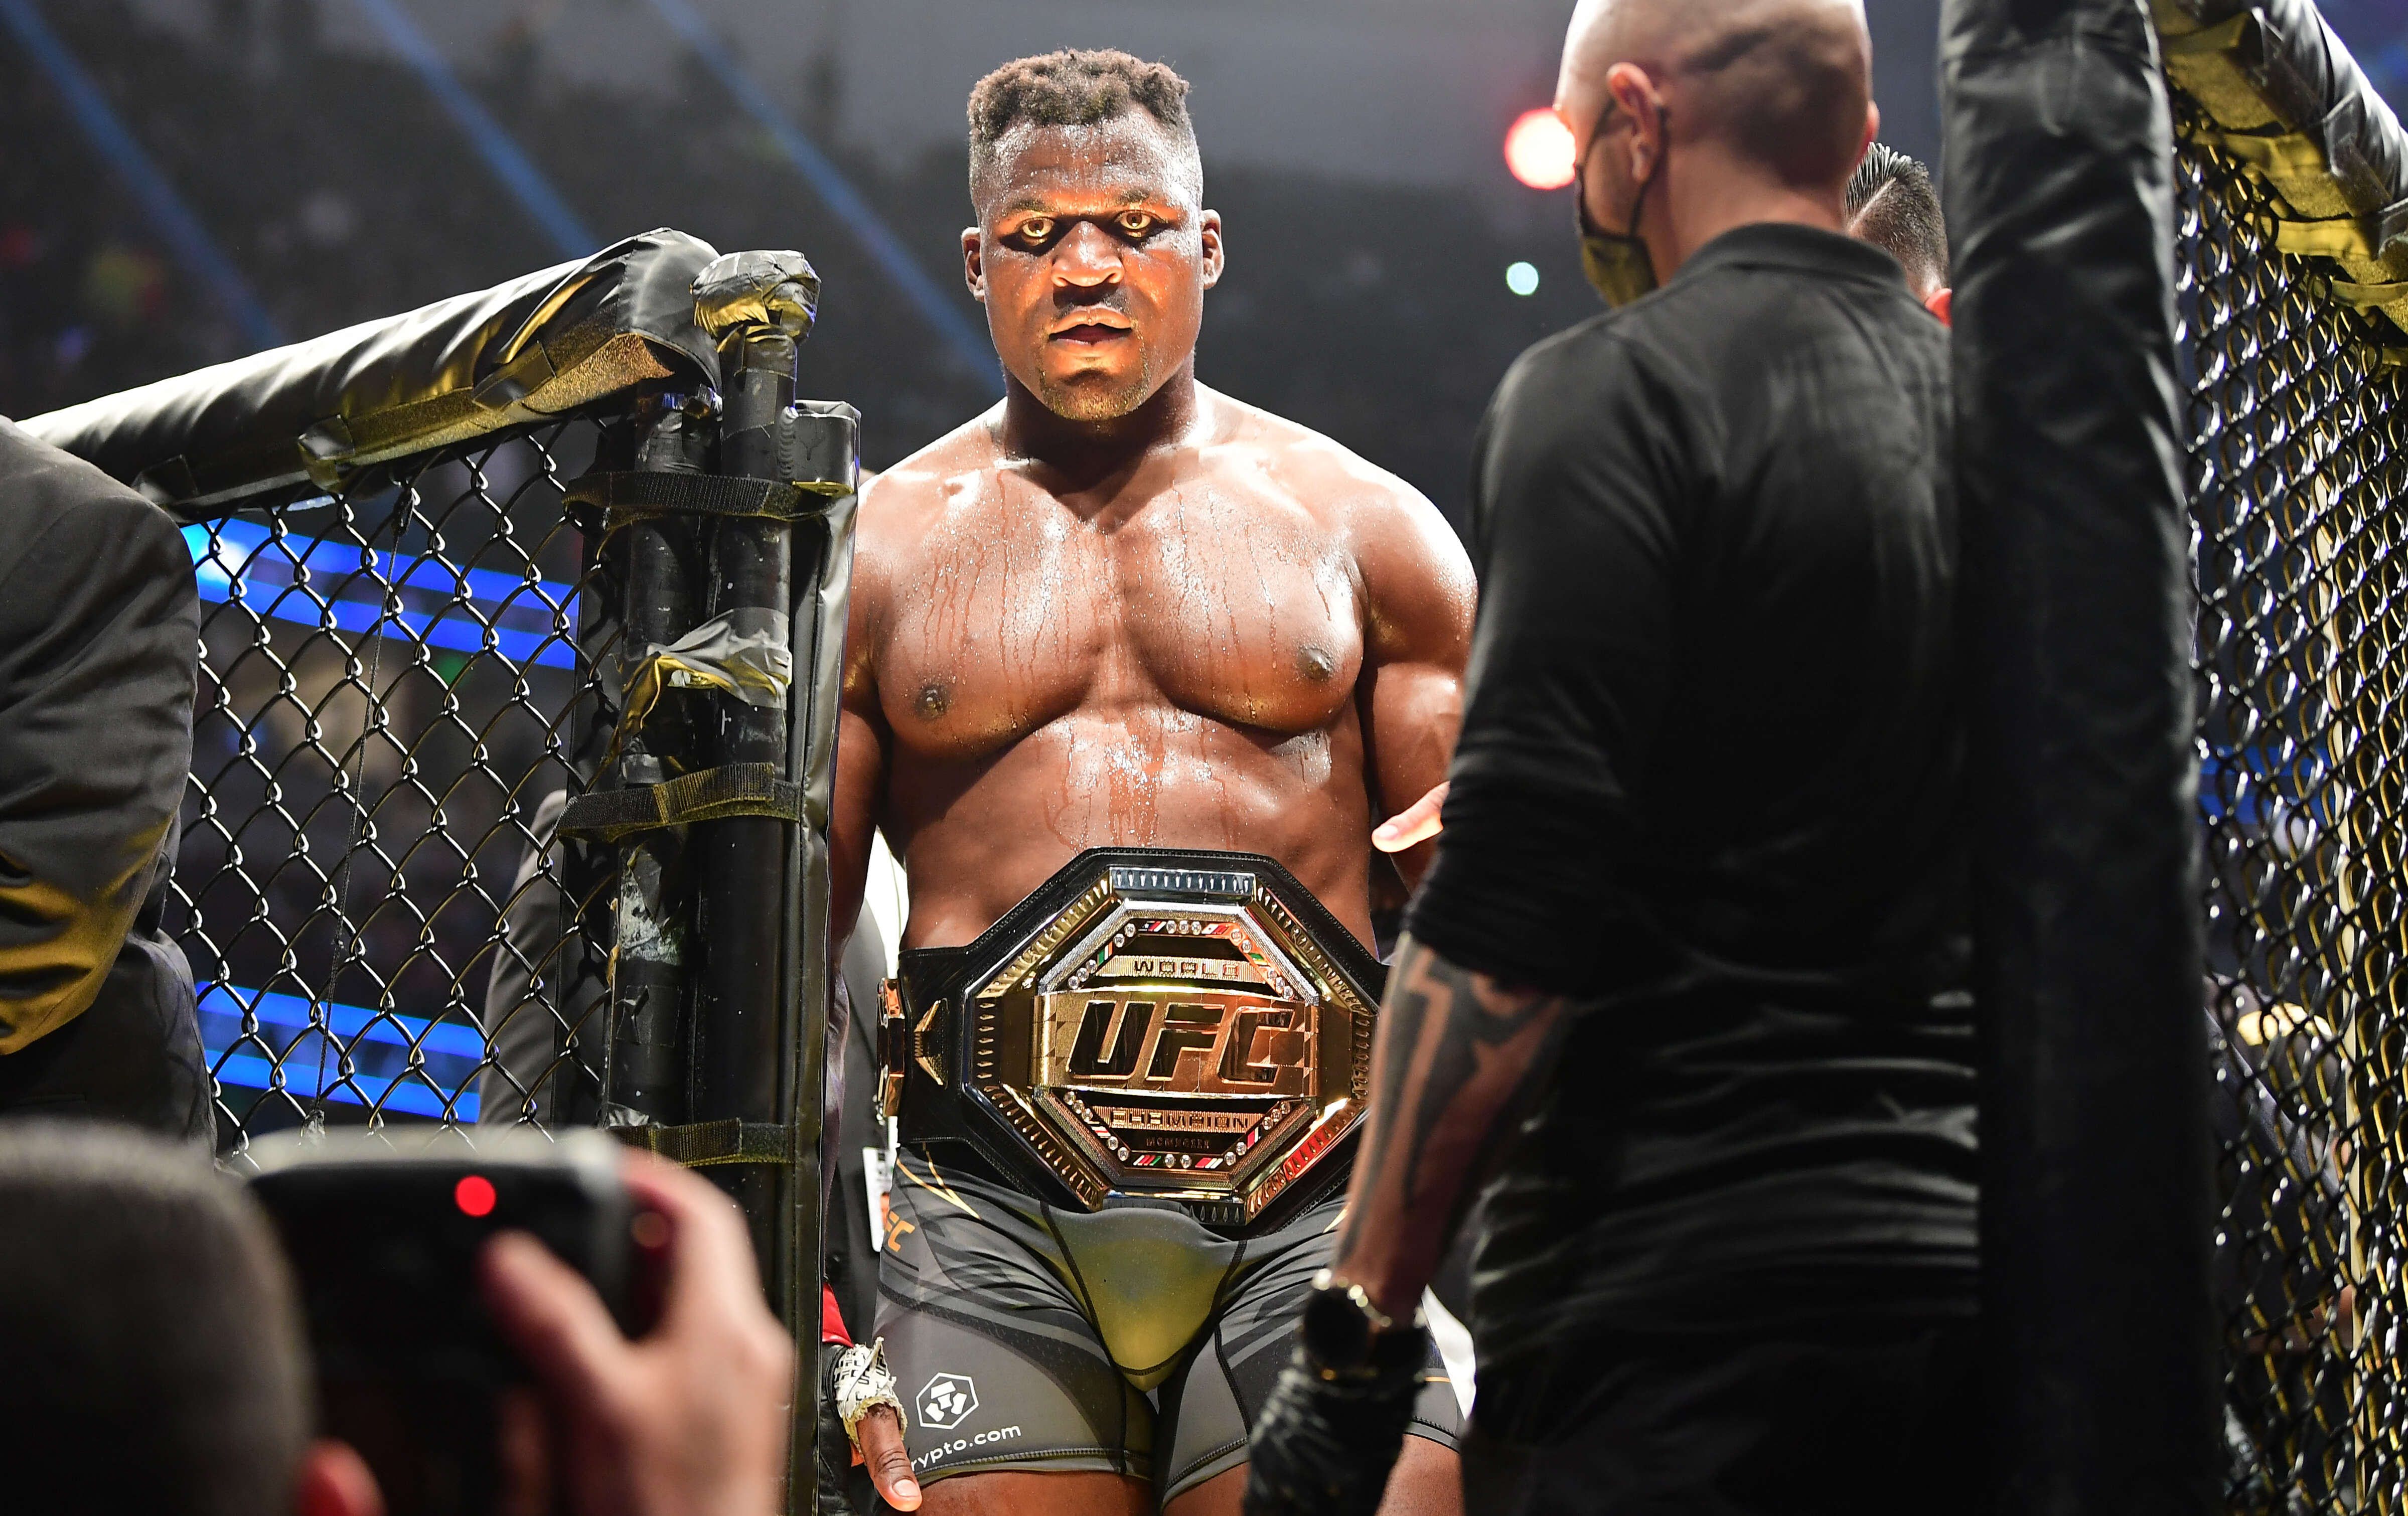 Cameroonian Francis Ngannou, MMA superstar and UFC heavyweight title holder, has decided not to extend with the most powerful league in his sport (photo taken in January 2022 in California).